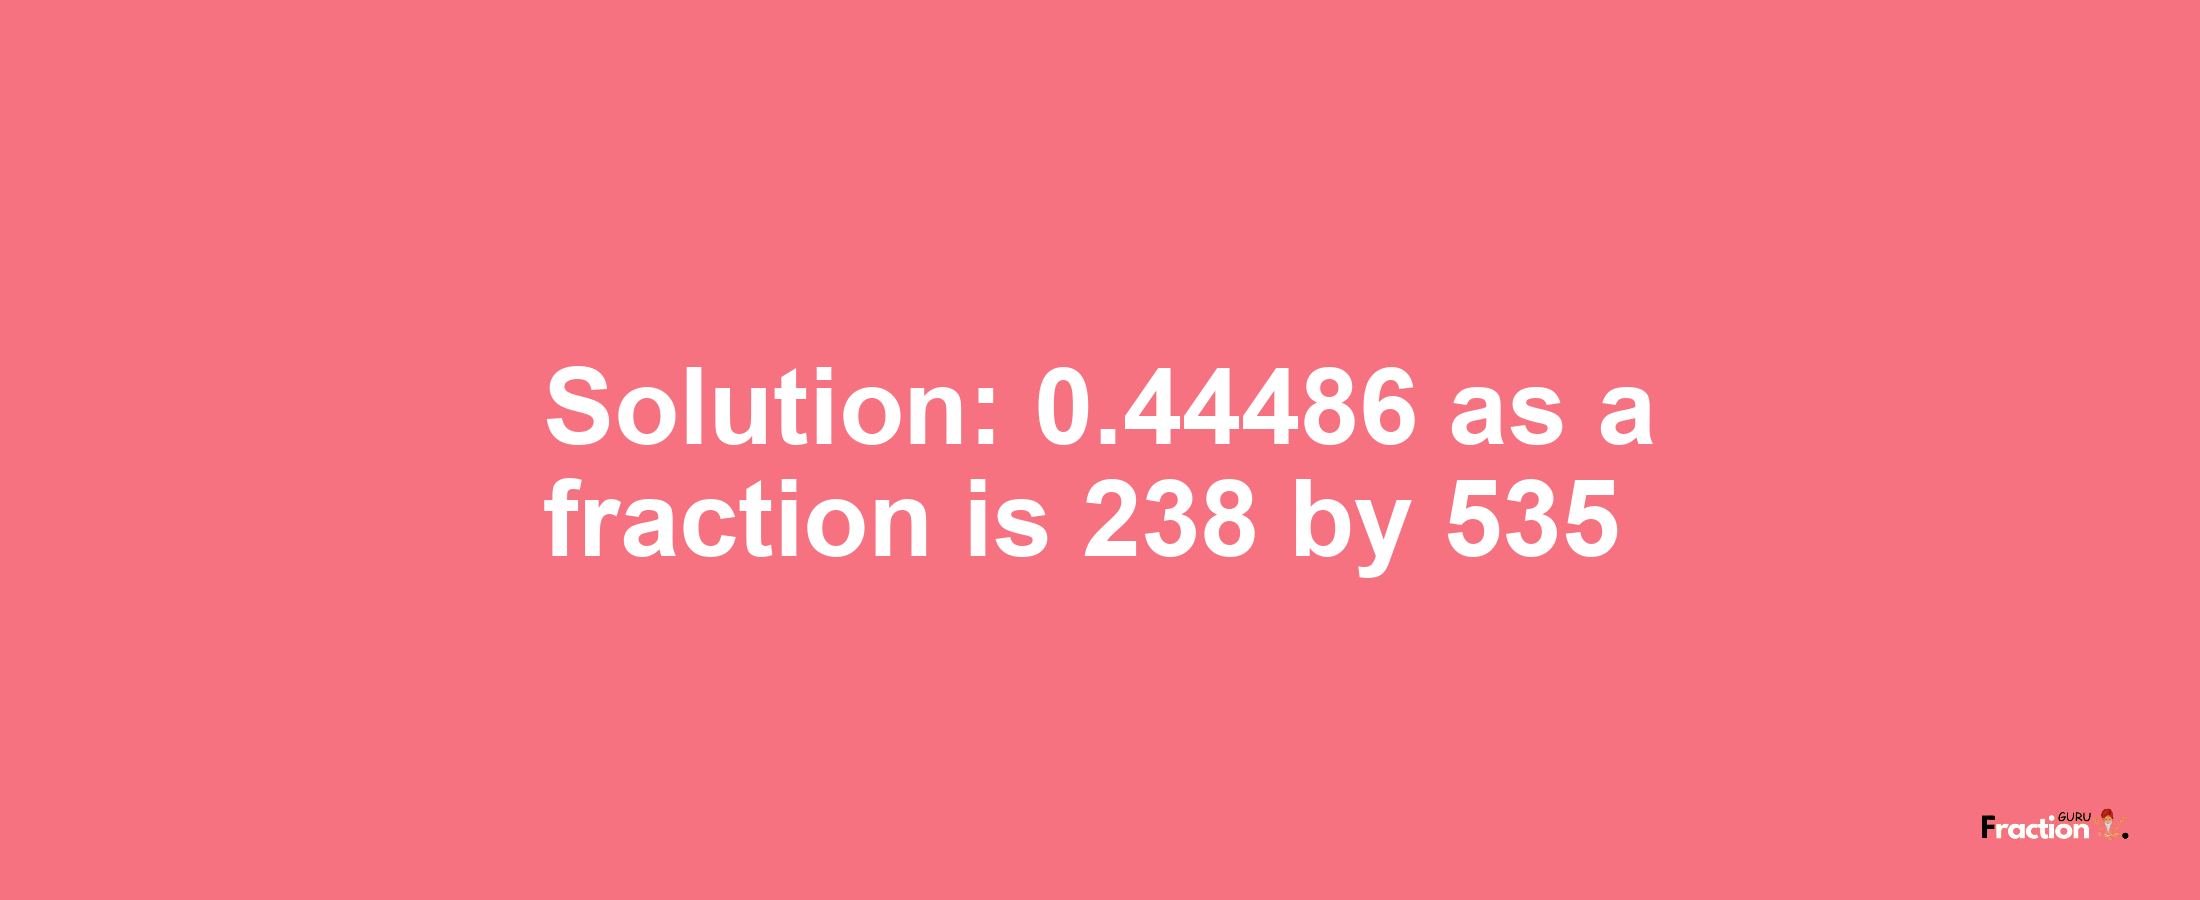 Solution:0.44486 as a fraction is 238/535